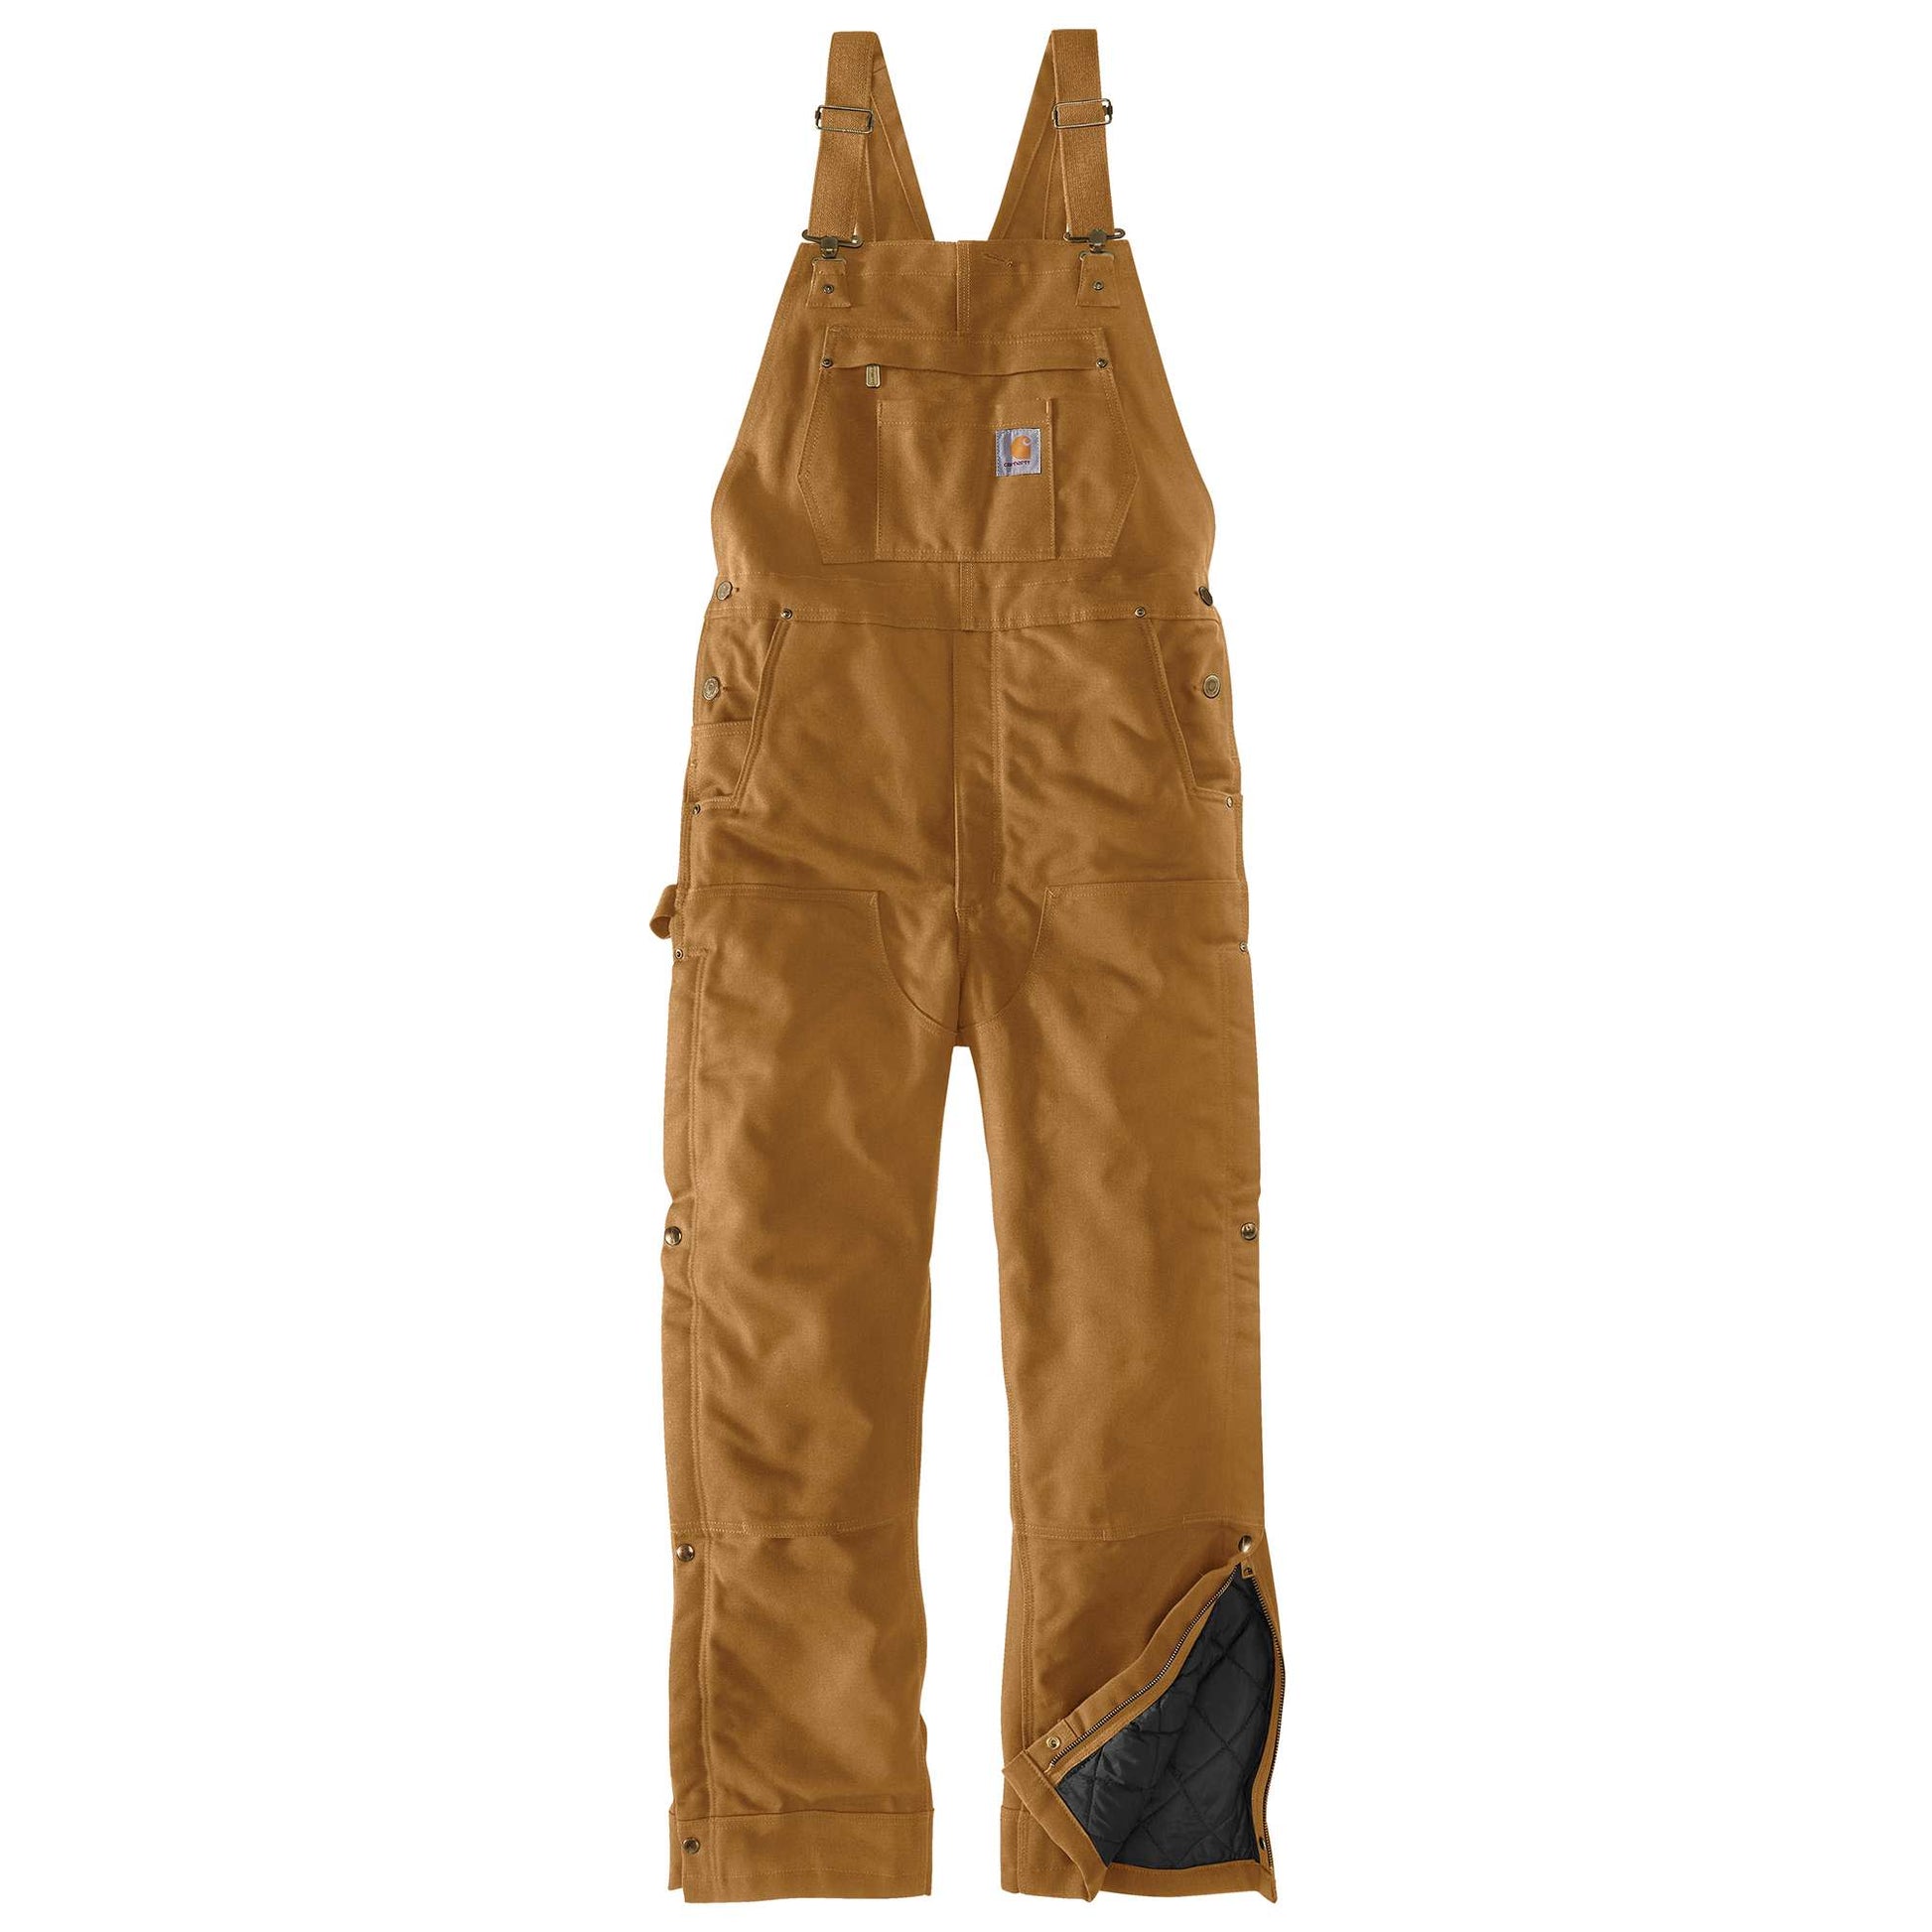 Loose Fit Firm Duck Insulated Bib Overall | Carhartt Reworked